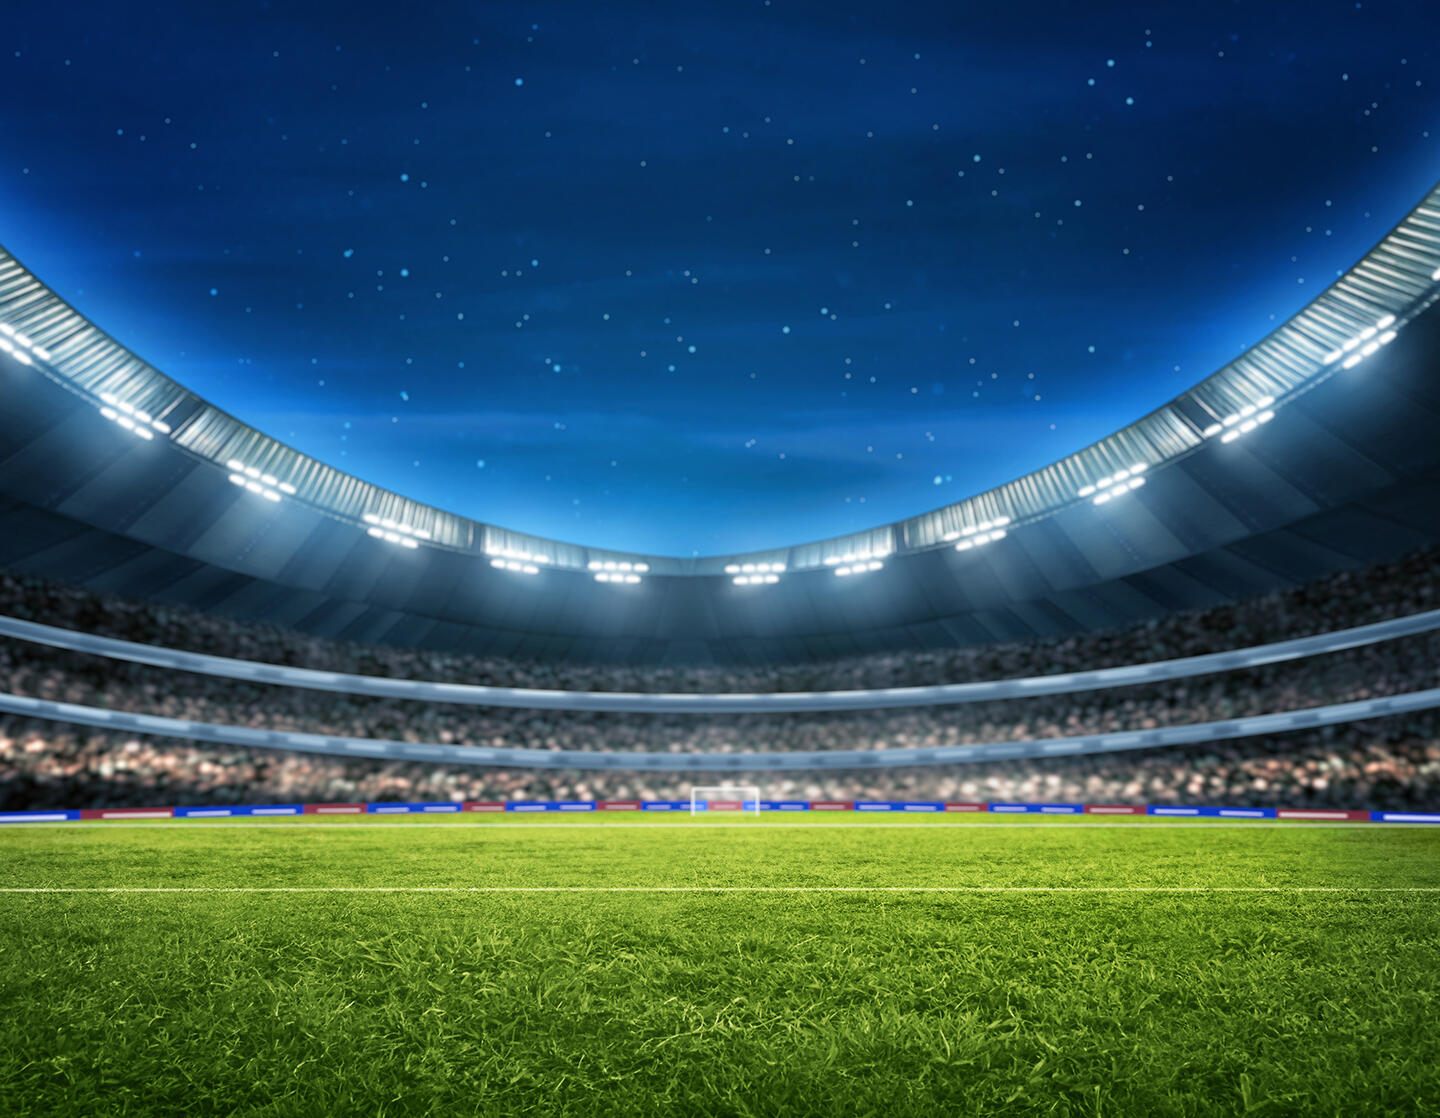 Stade de Bordeaux lit up at night under a starry sky, with an impeccable pitch, suggesting an evening match atmosphere, close to the appart'hôtel Bordeaux, convenient for visitors looking for accommodation close to the sporting event.